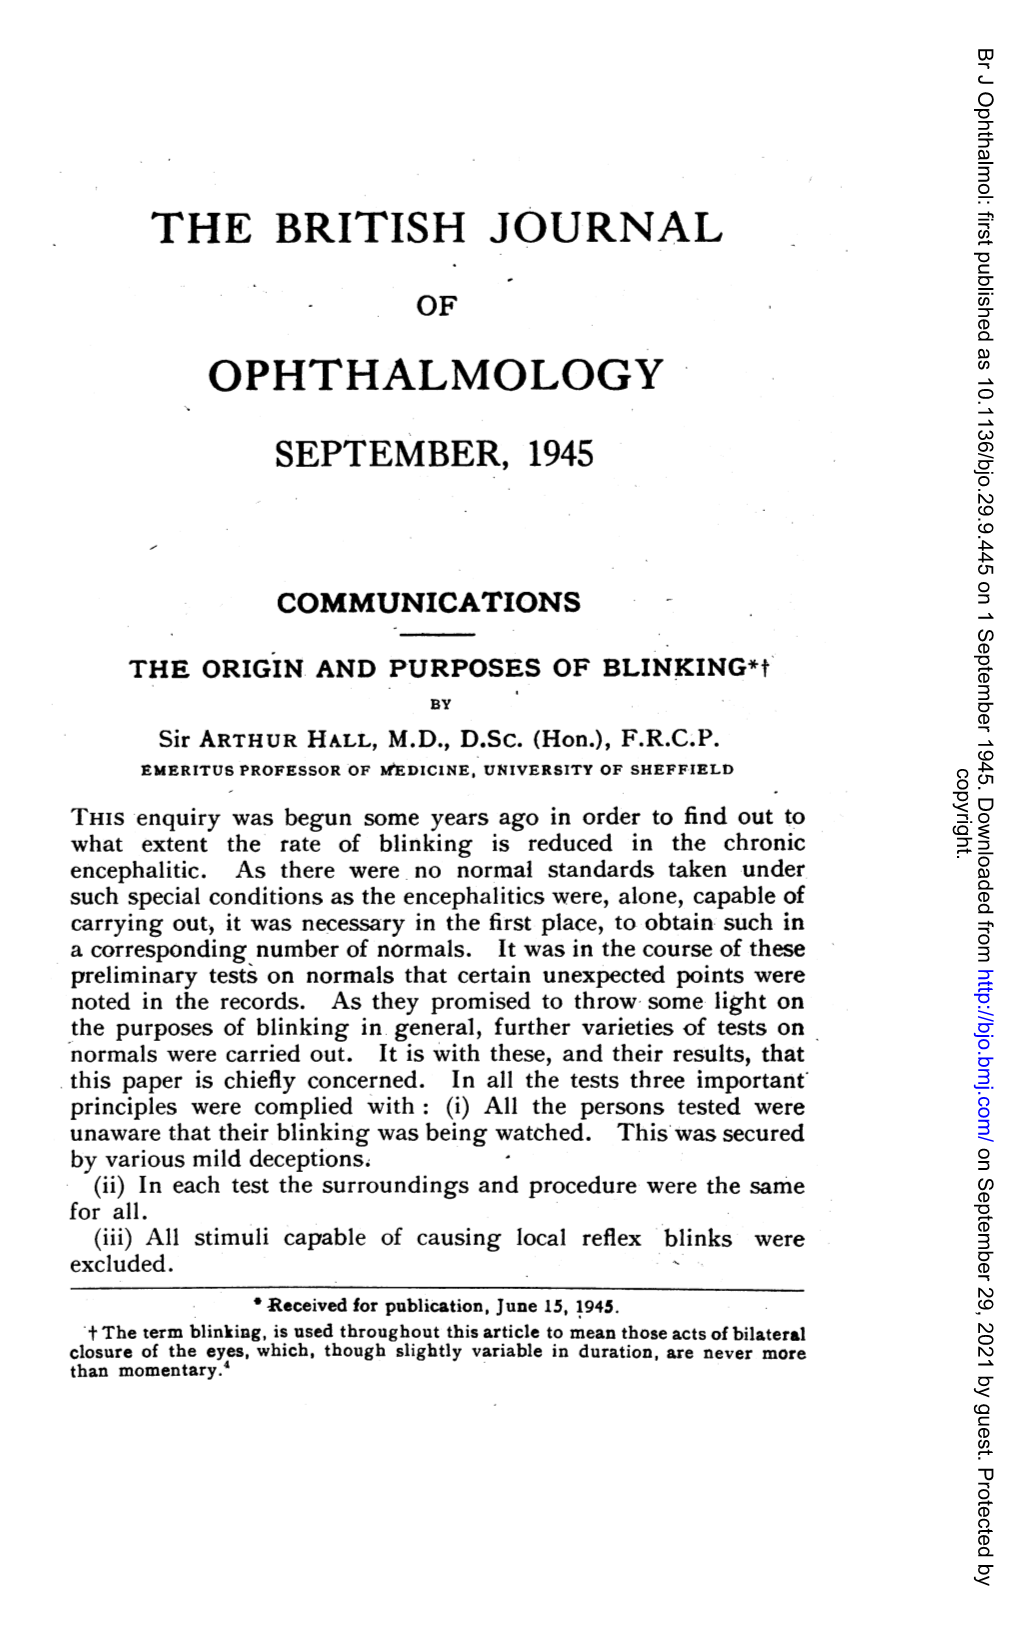 THE ORIGIN and PURPOSES of BLINKING*F by Sir ARTHUR HALL, M.D., D.Sc